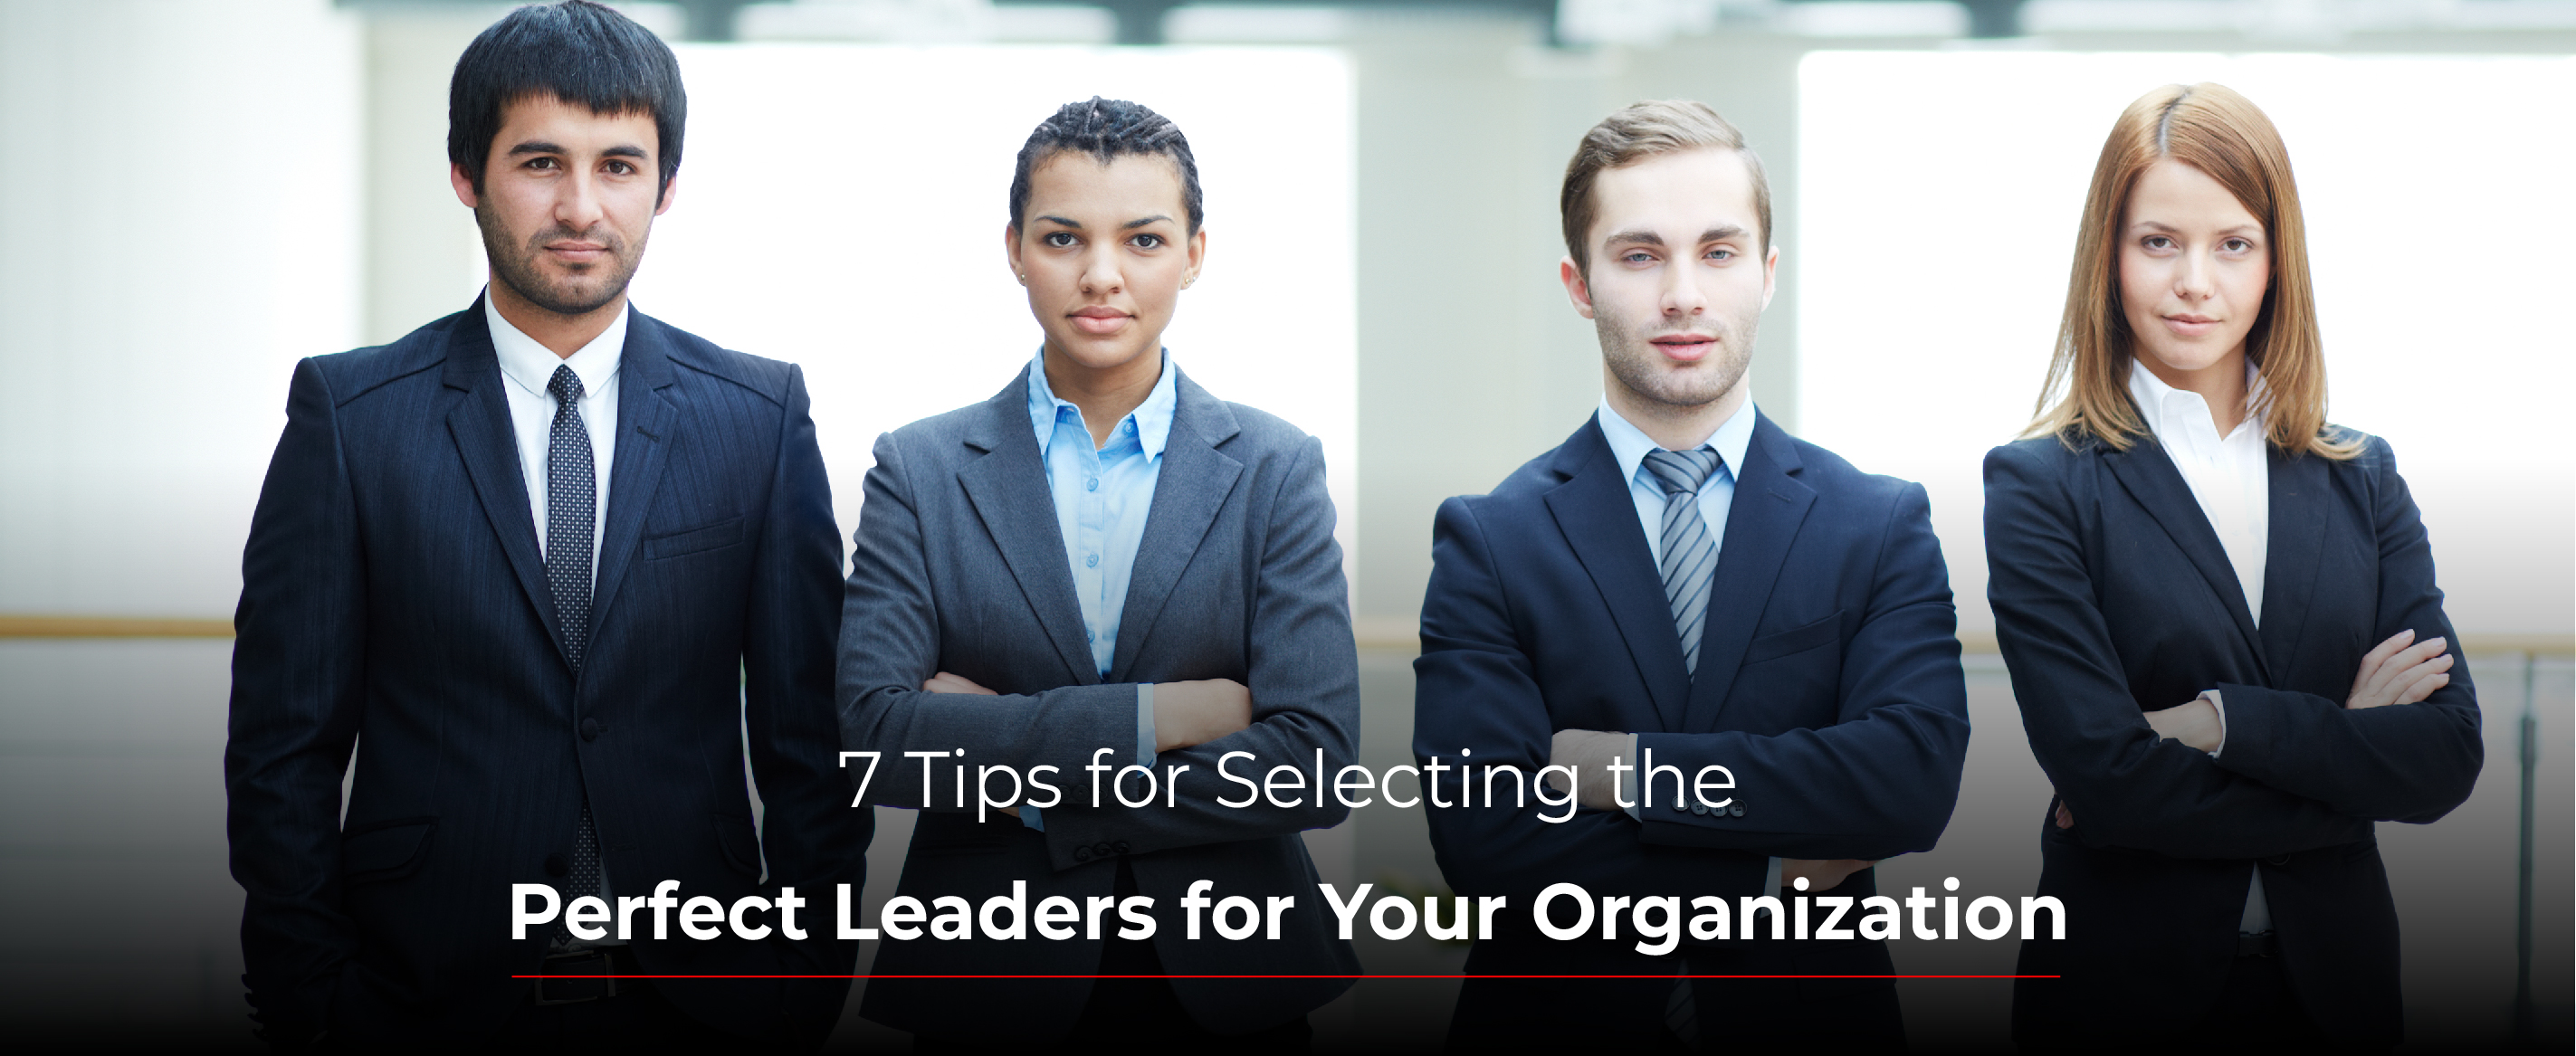 7 Tips for Selecting the Perfect Leaders for Your Organization